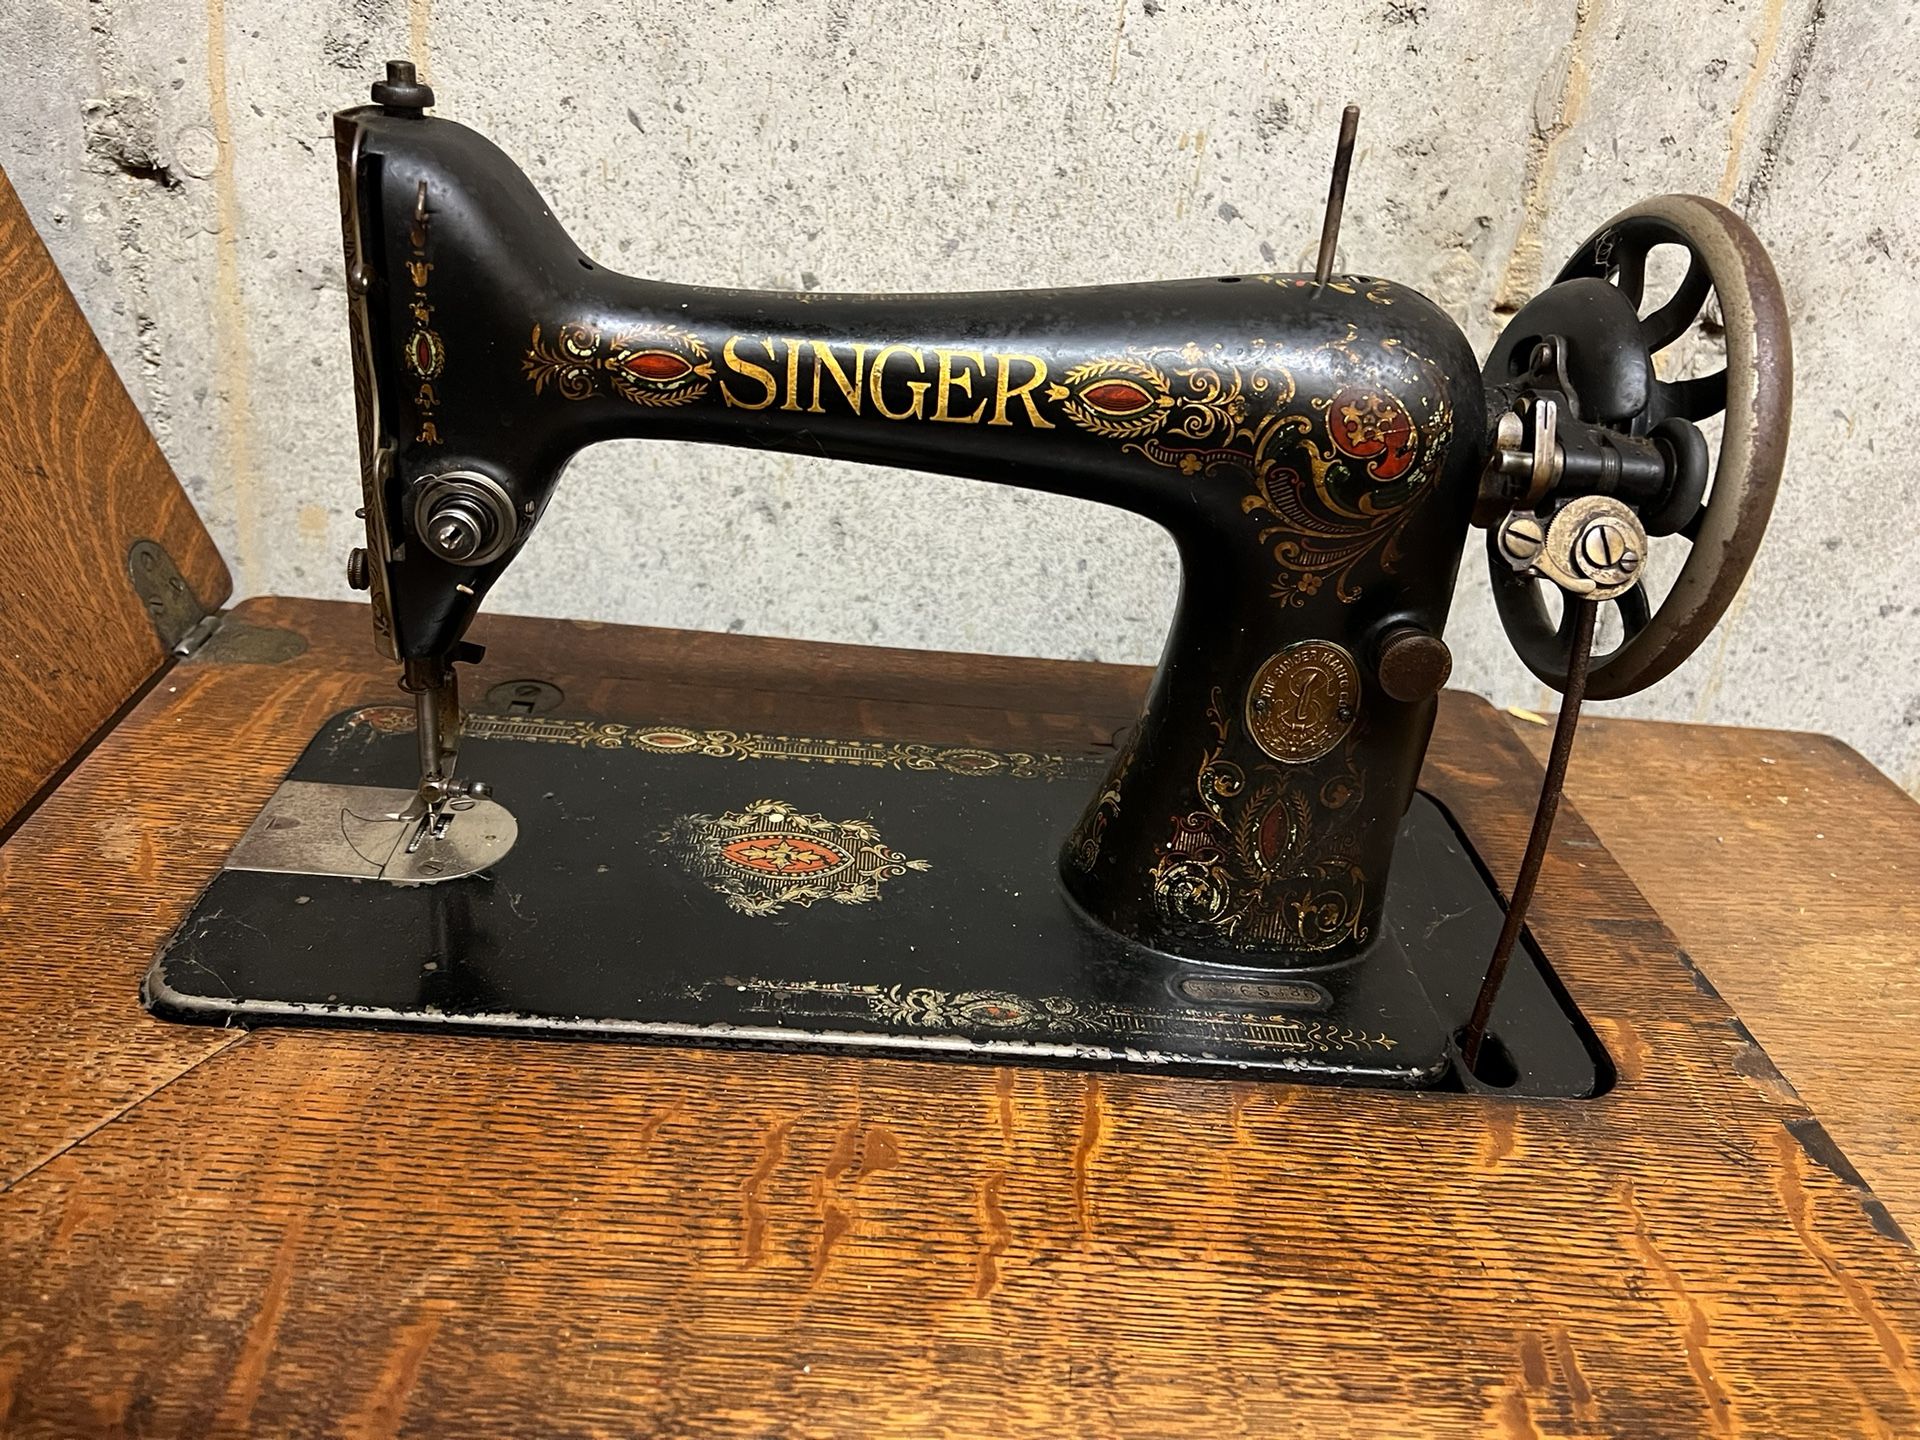 Antique 1914 Singer Sewing Machine In Cabinet